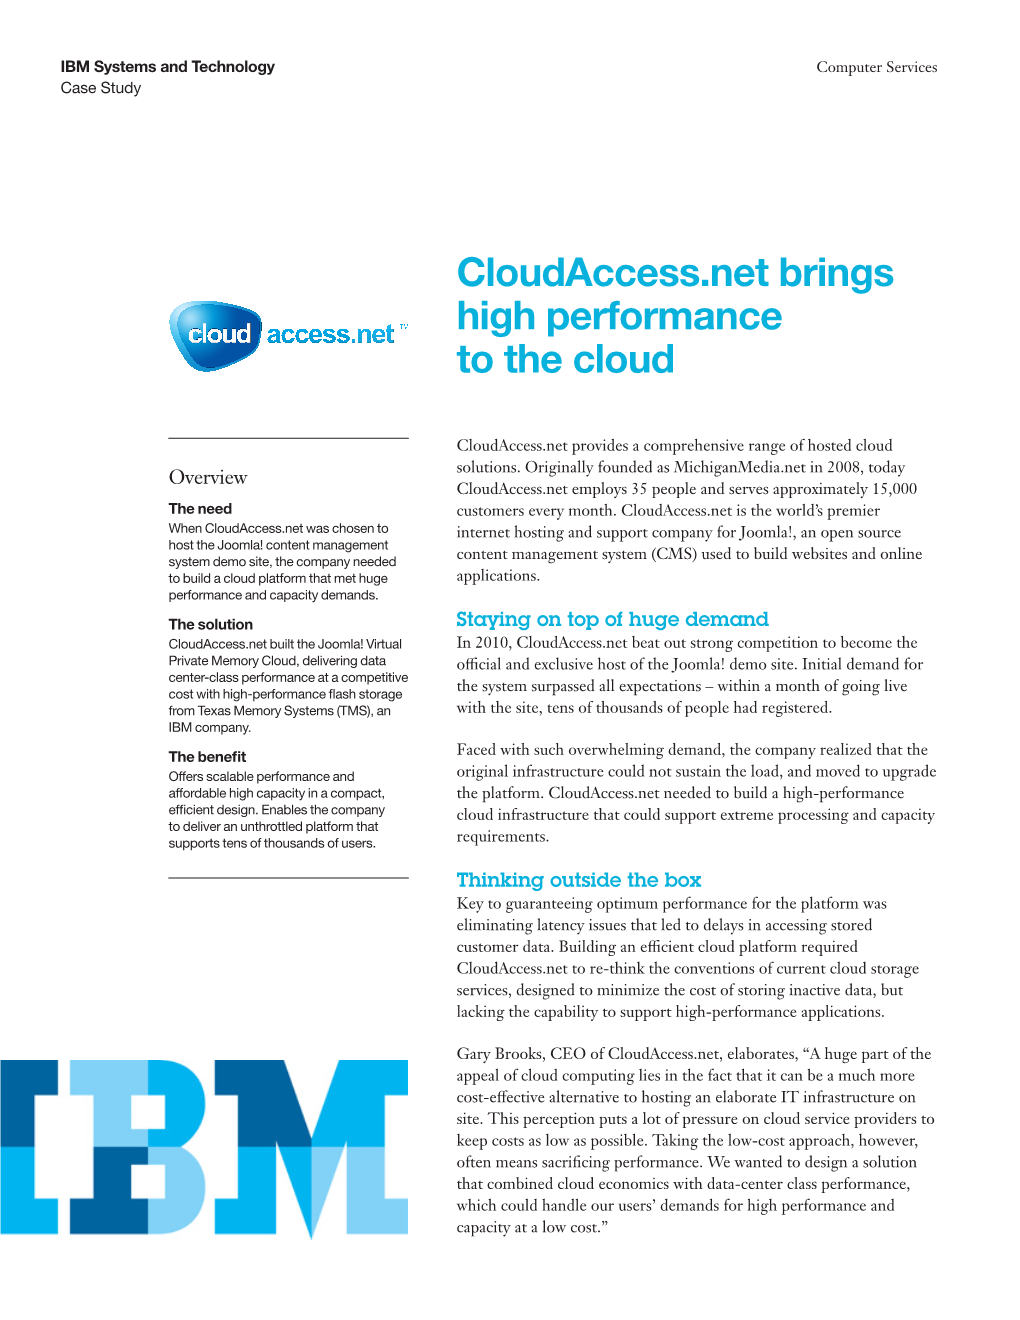 Cloudaccess.Net Brings High Performance to the Cloud